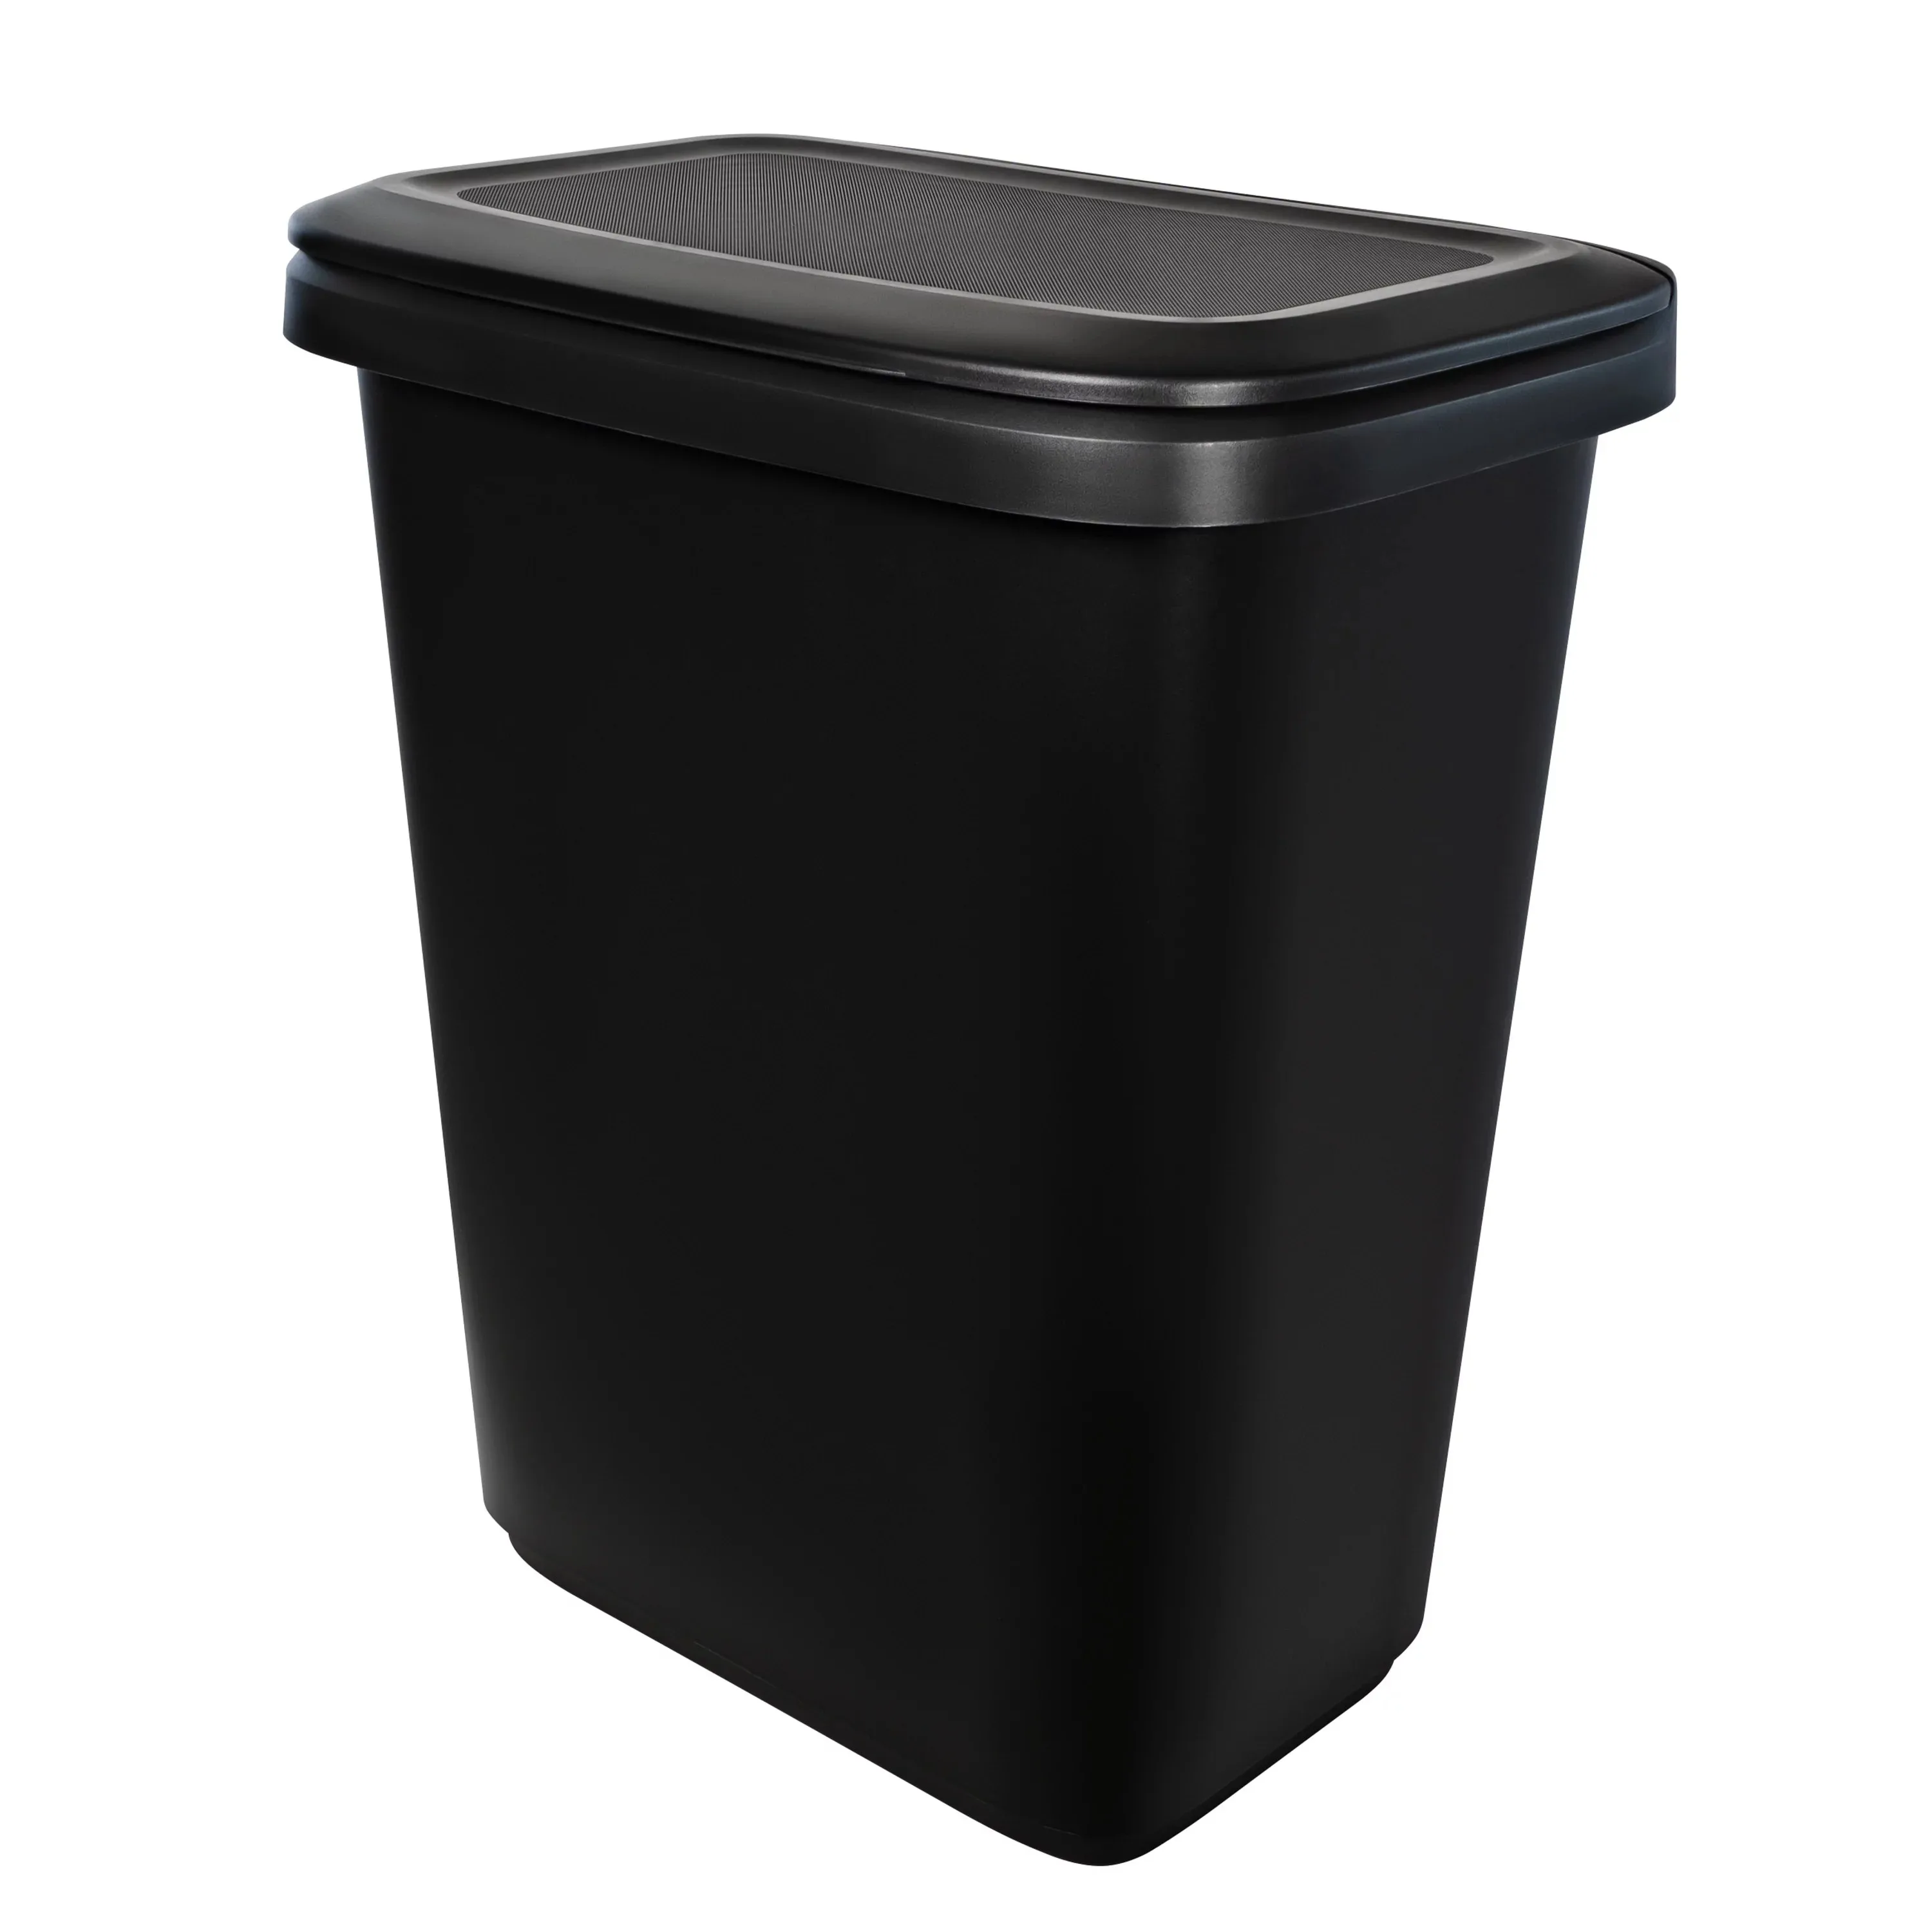 

20.4 Gallon Trash Can, Plastic Dual Function Divided Extra Large Kitchen Trash Can, Black